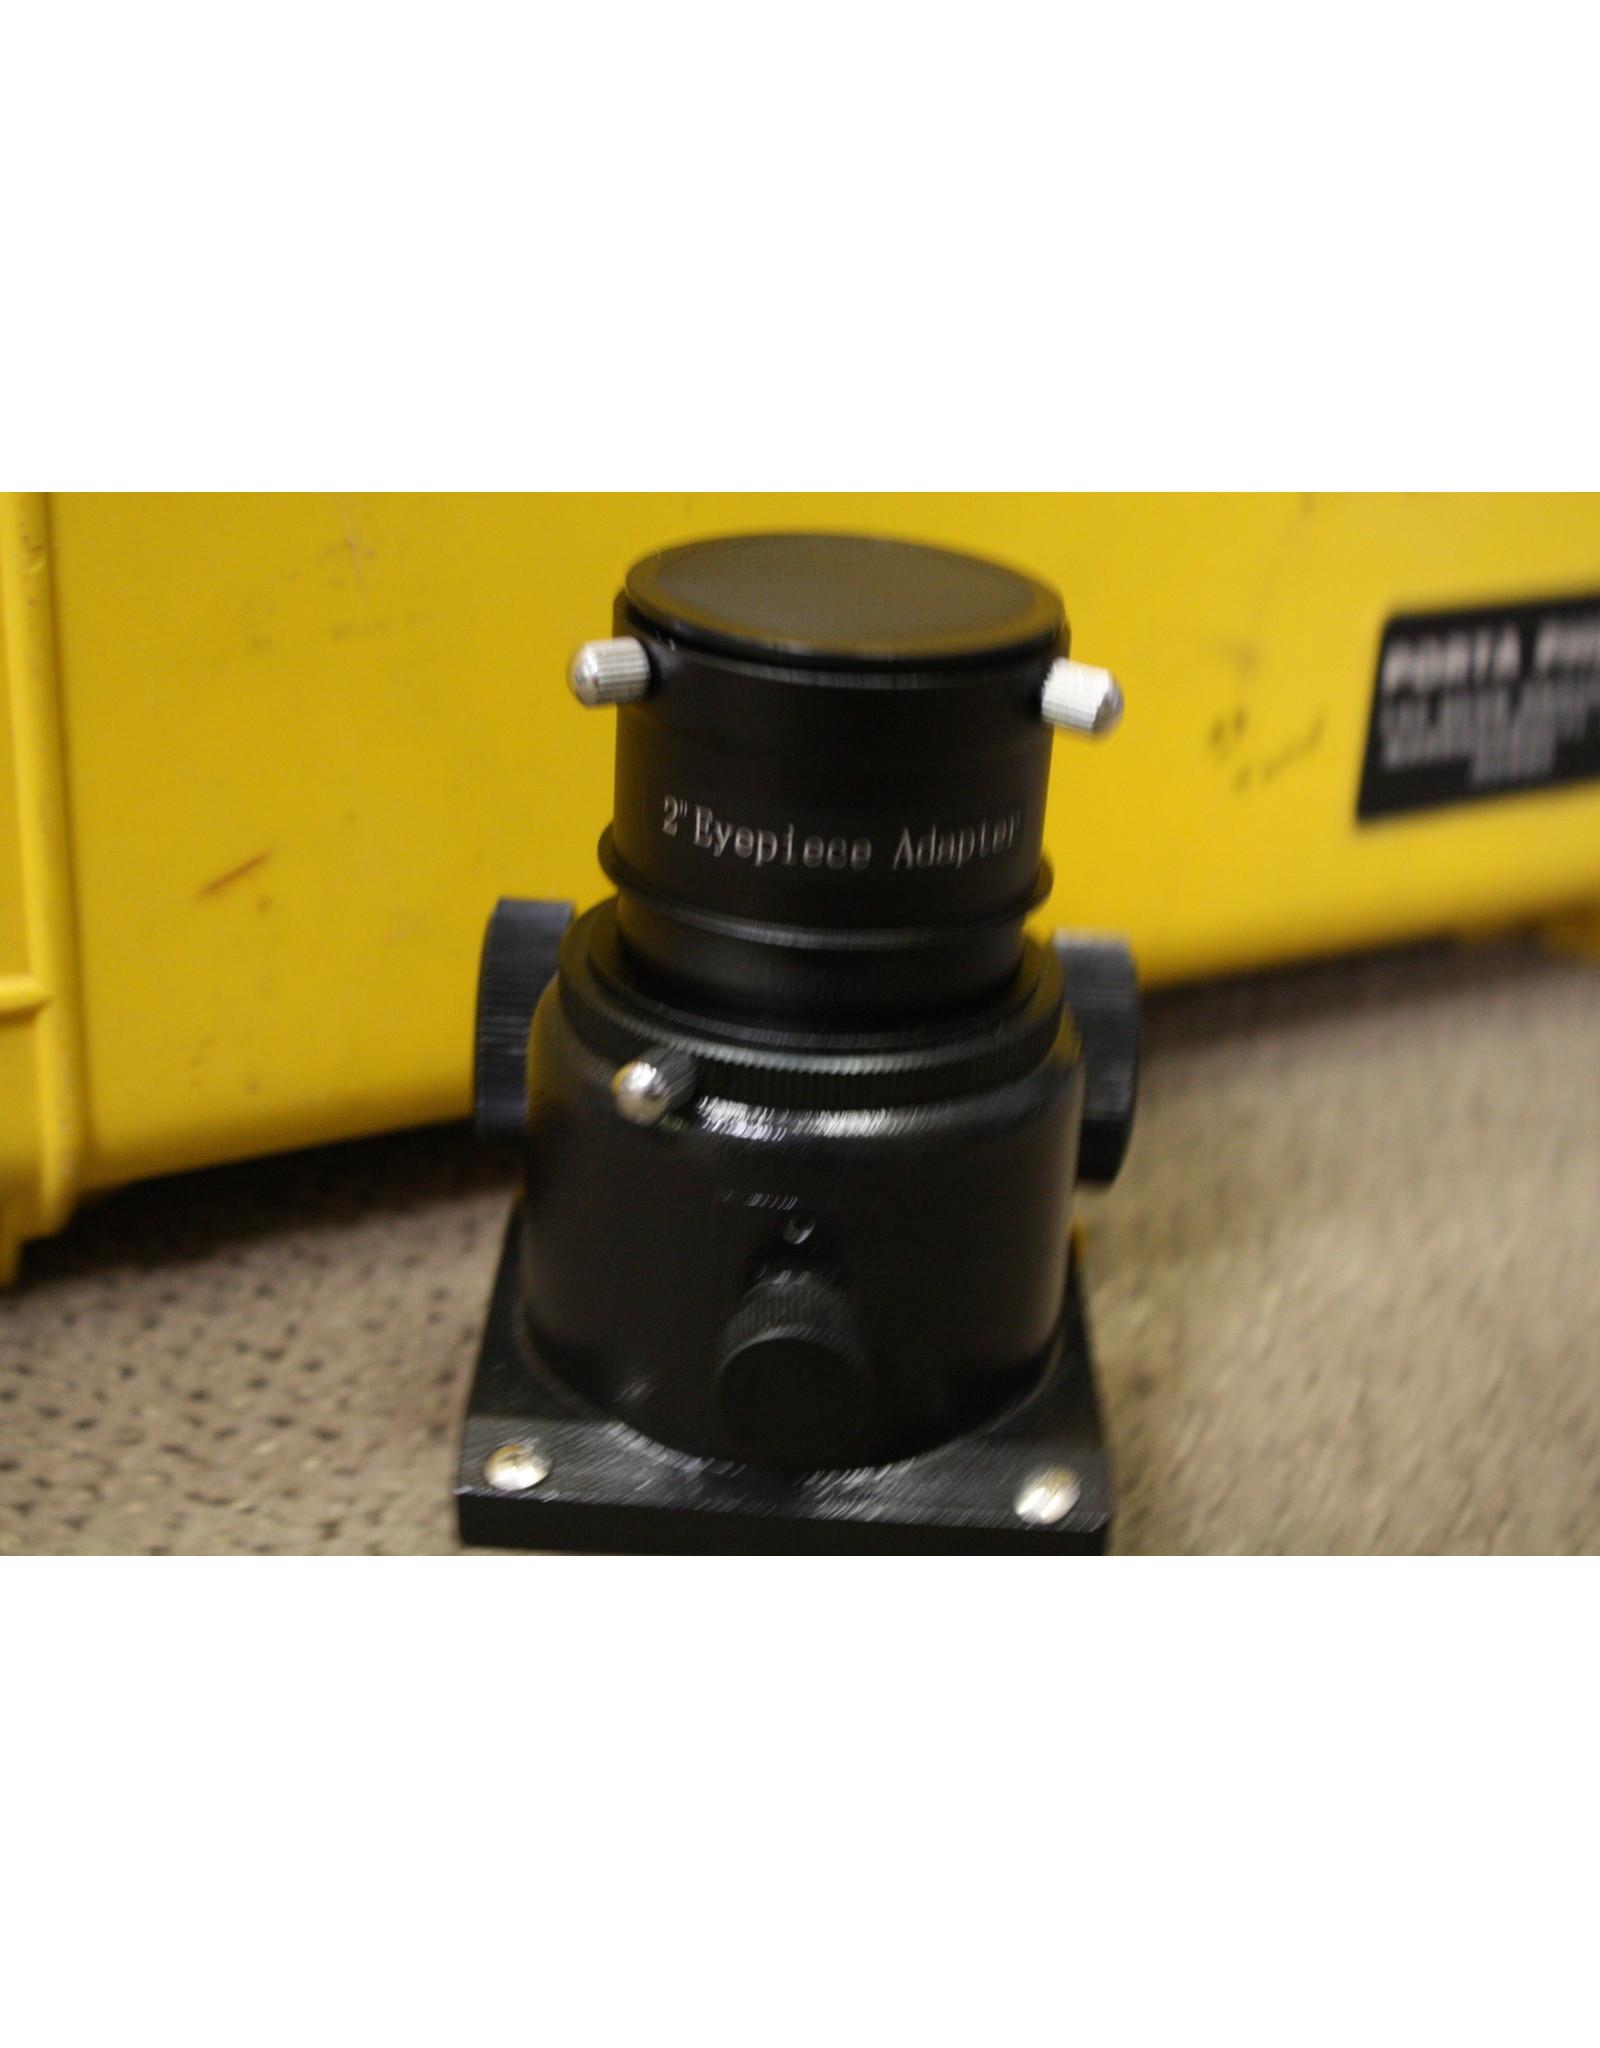 Celestron Celestron 2 Inch Focuser with 1.25 Adapter for C8-N 8" f5 Newtonian Reflector